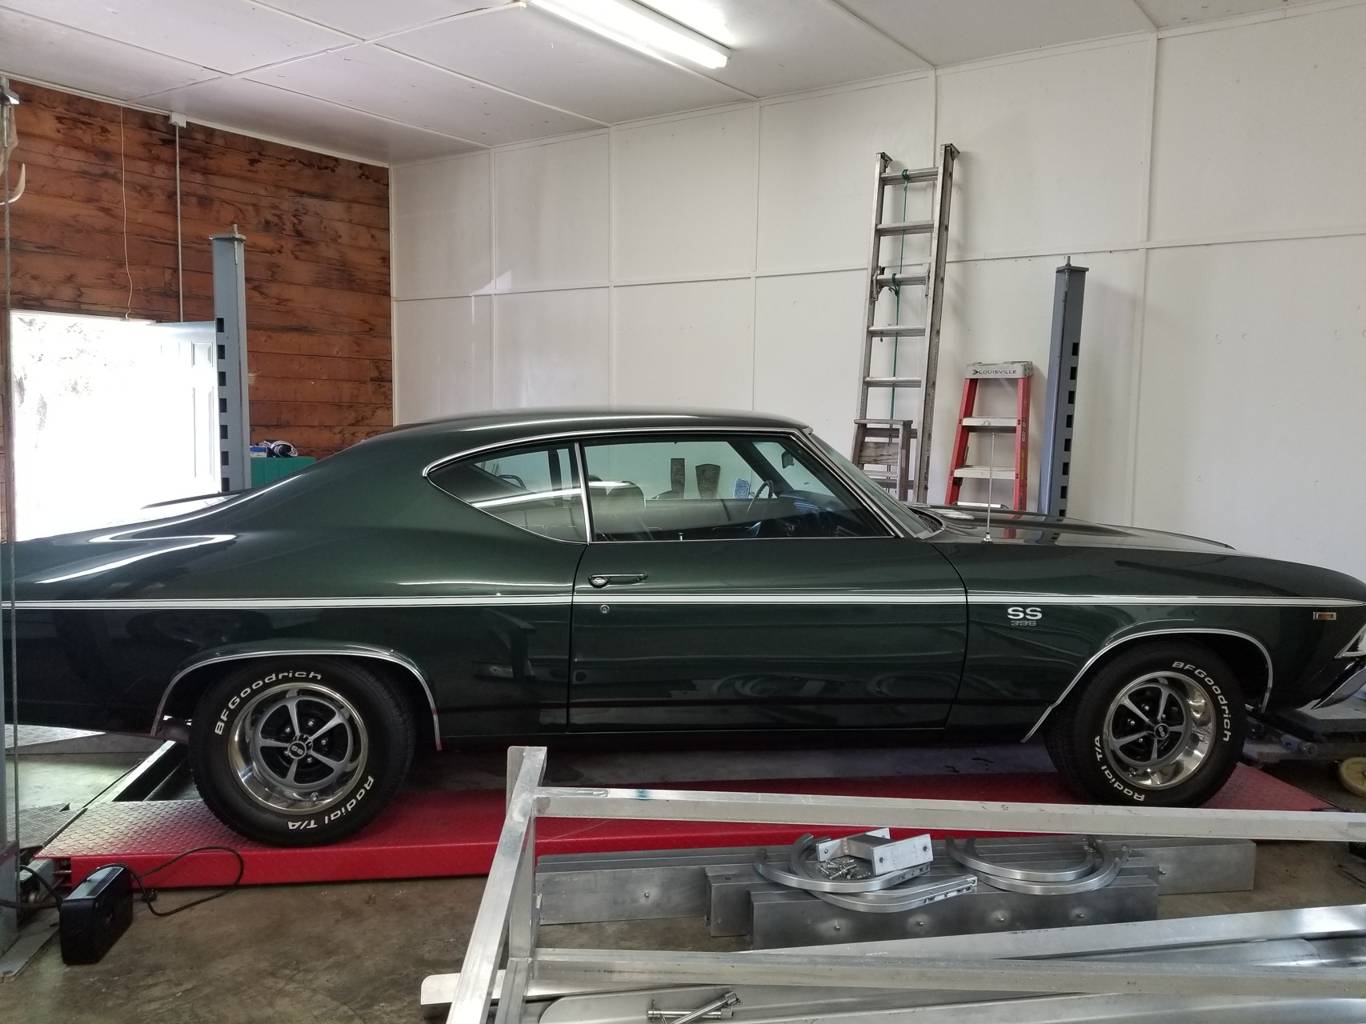 4th Image of a 1969 CHEVROLET CHEVELLE SS